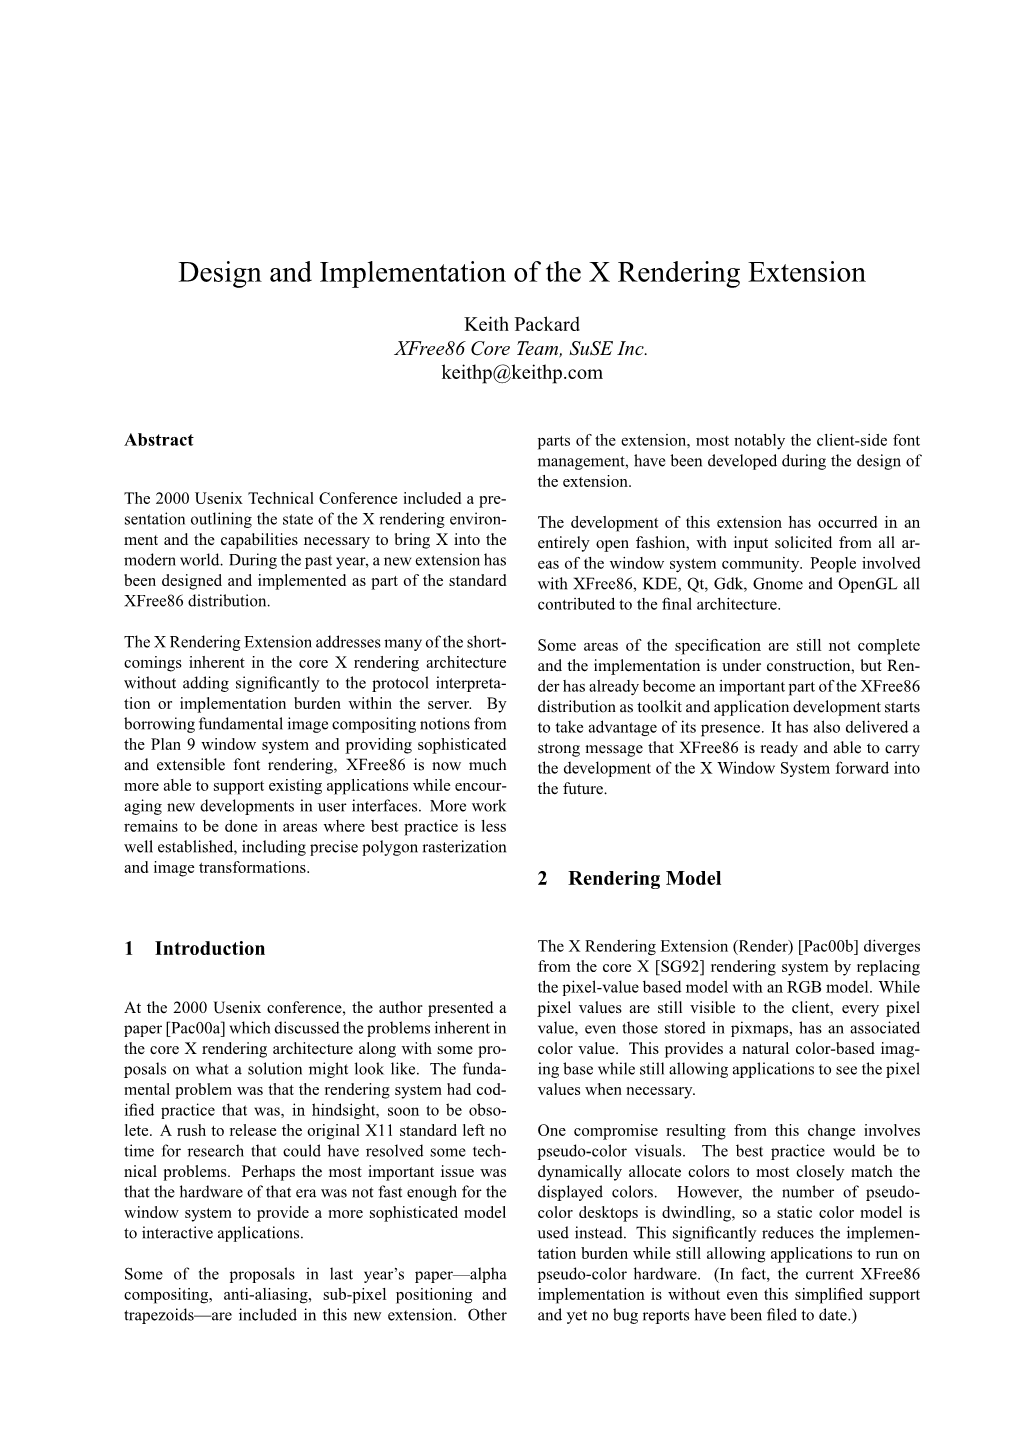 Design and Implementation of the X Rendering Extension